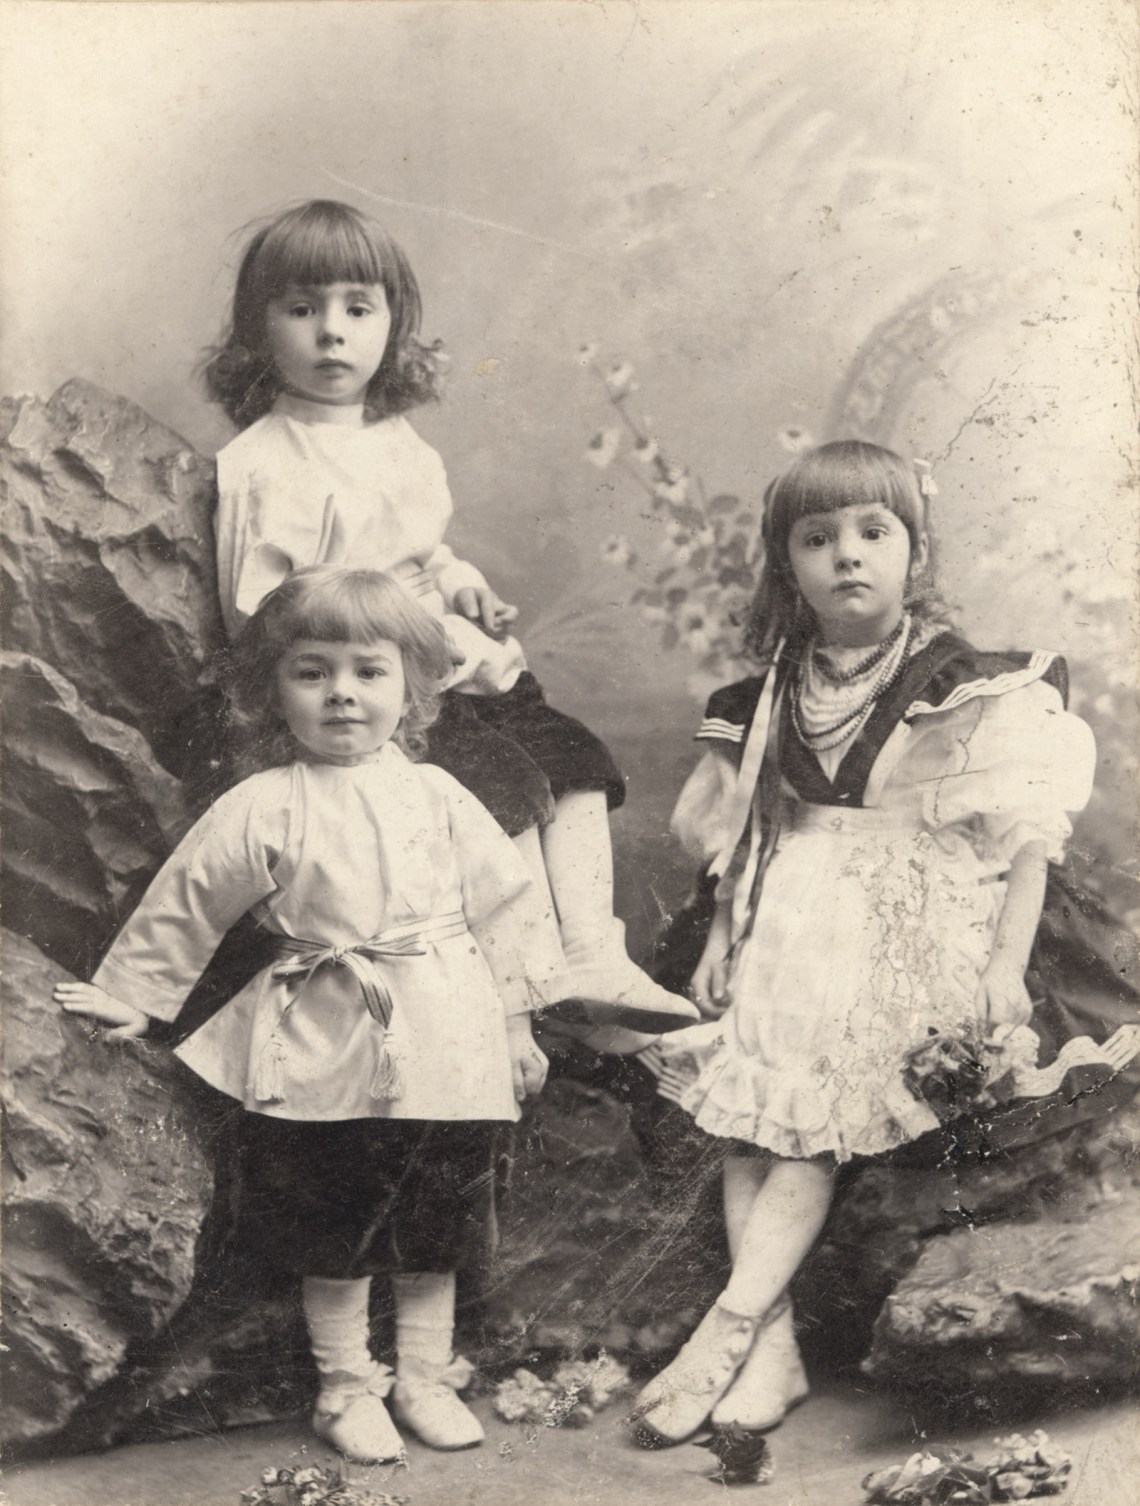 Georgi Balanchivadze with his brother, Andrei, and his sister, Tamara, St. Petersburg, early 1900s